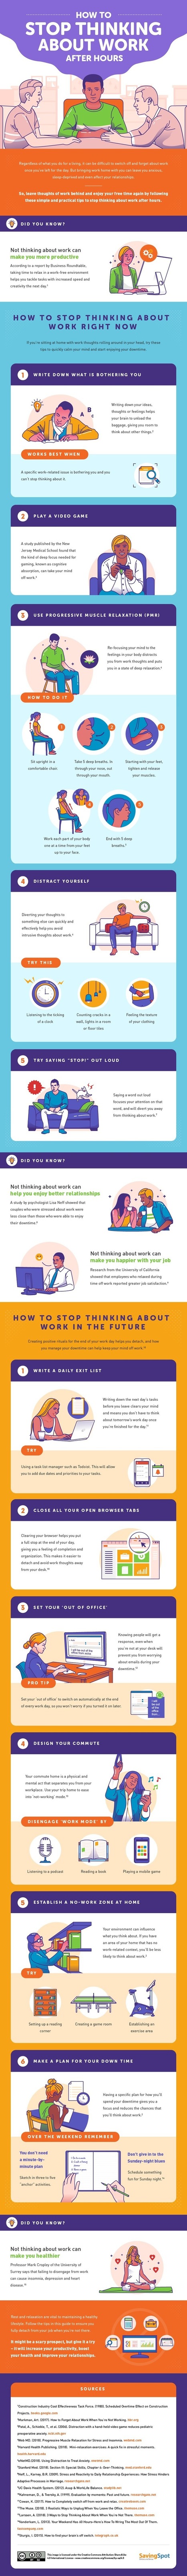 How to switch off your work brain after hours (infographic) via @digitaliworld | ED 262 Research, Reference & Resource Skills | Scoop.it